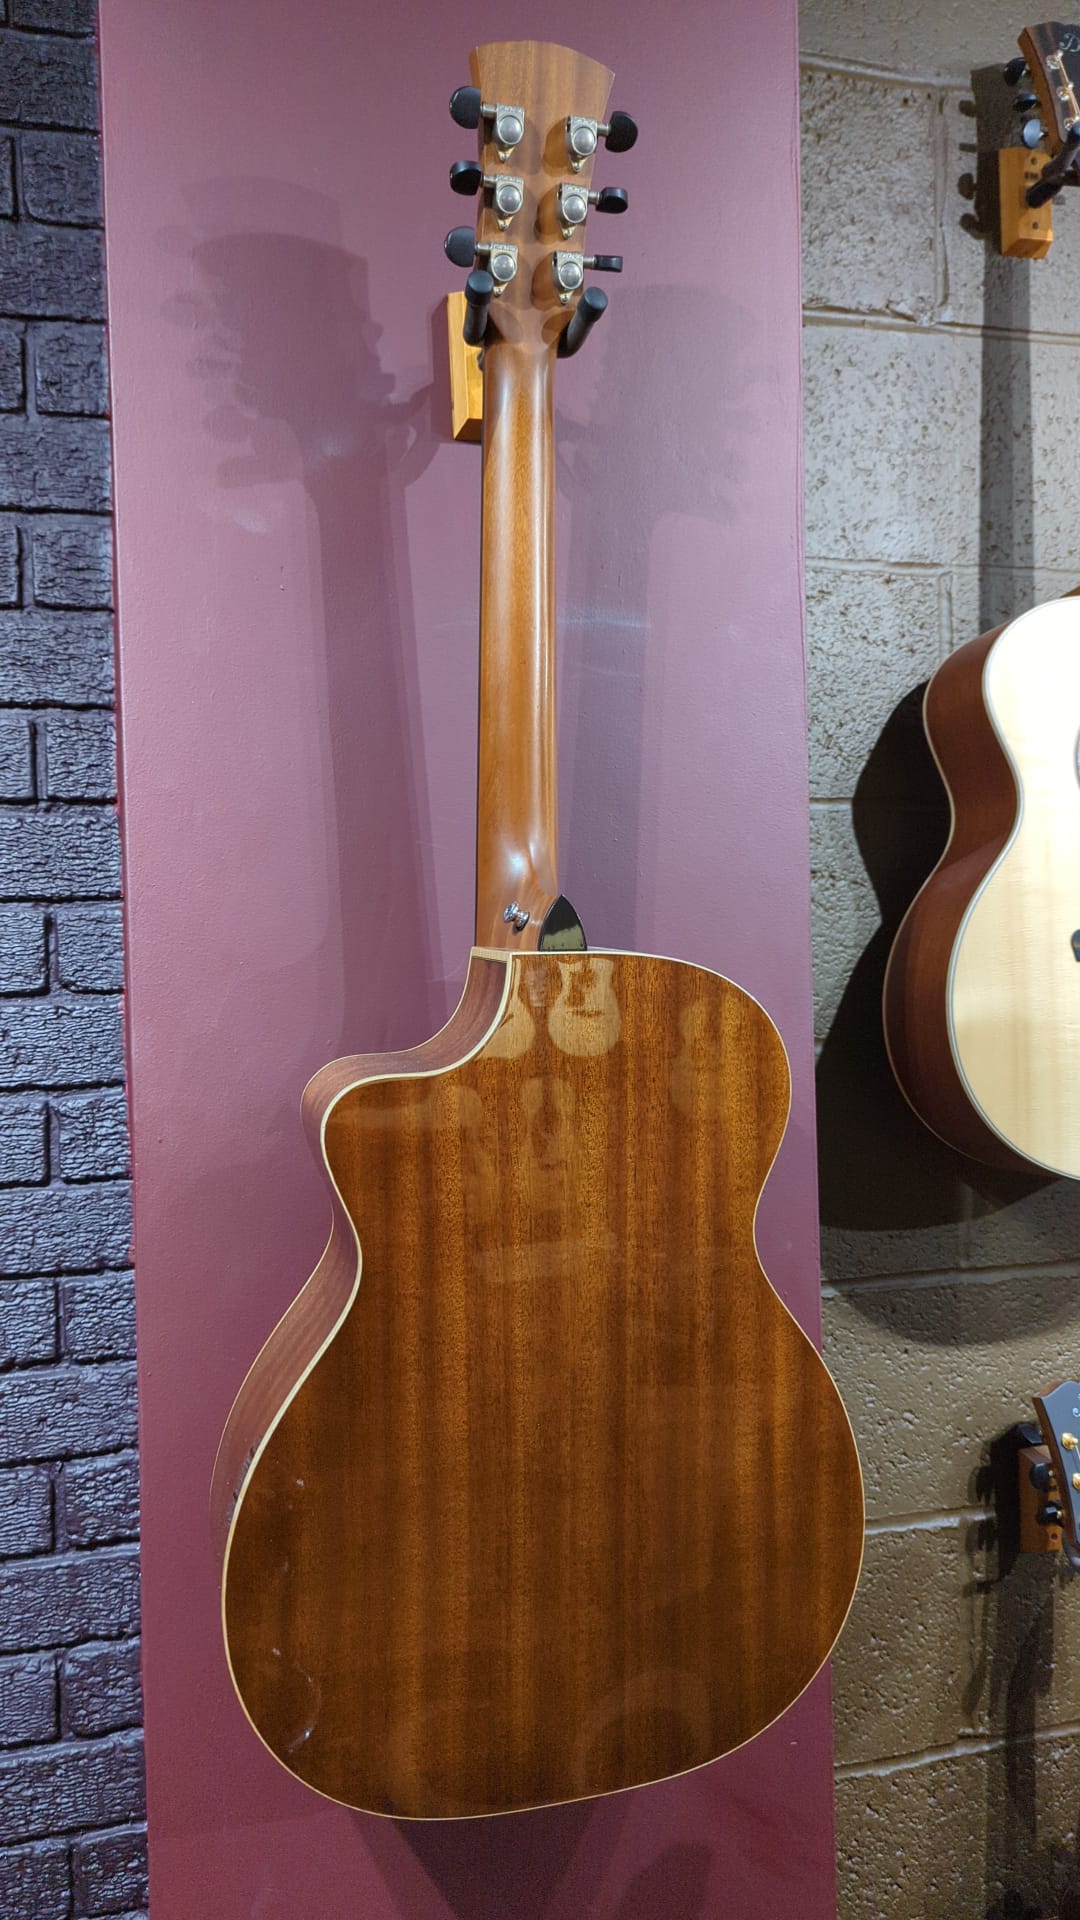 Faith legacy Earth (Used), Acoustic Guitar for sale at Richards Guitars.